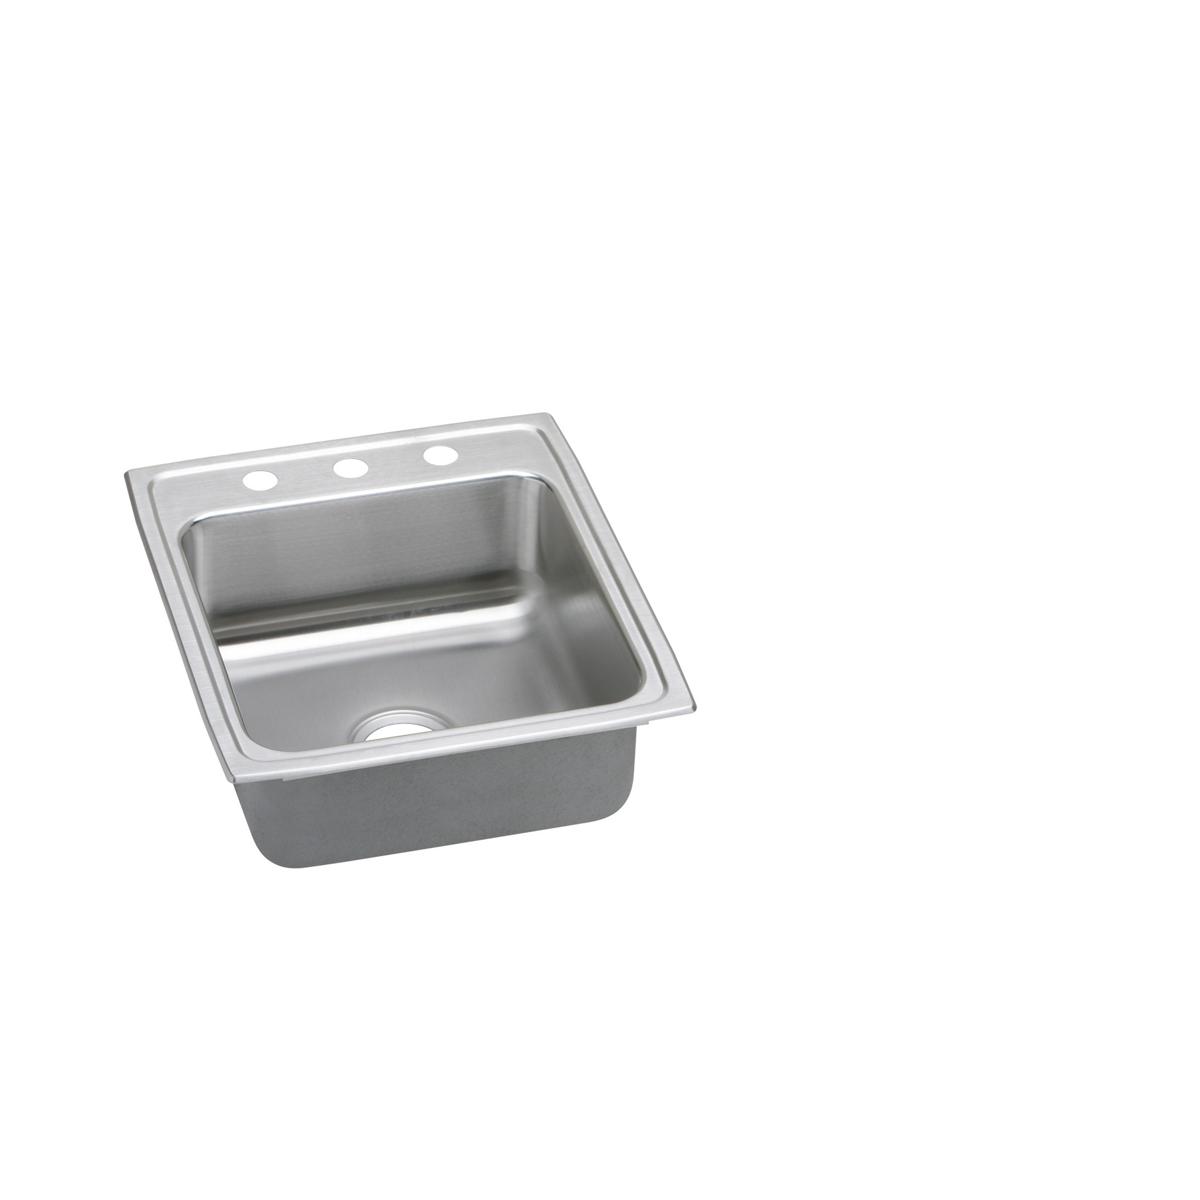 Elkay Lustertone Classic 19-1/2" x 22" x 5-1/2" MR2-Hole Single Bowl Drop-in ADA Sink with Quick-clip